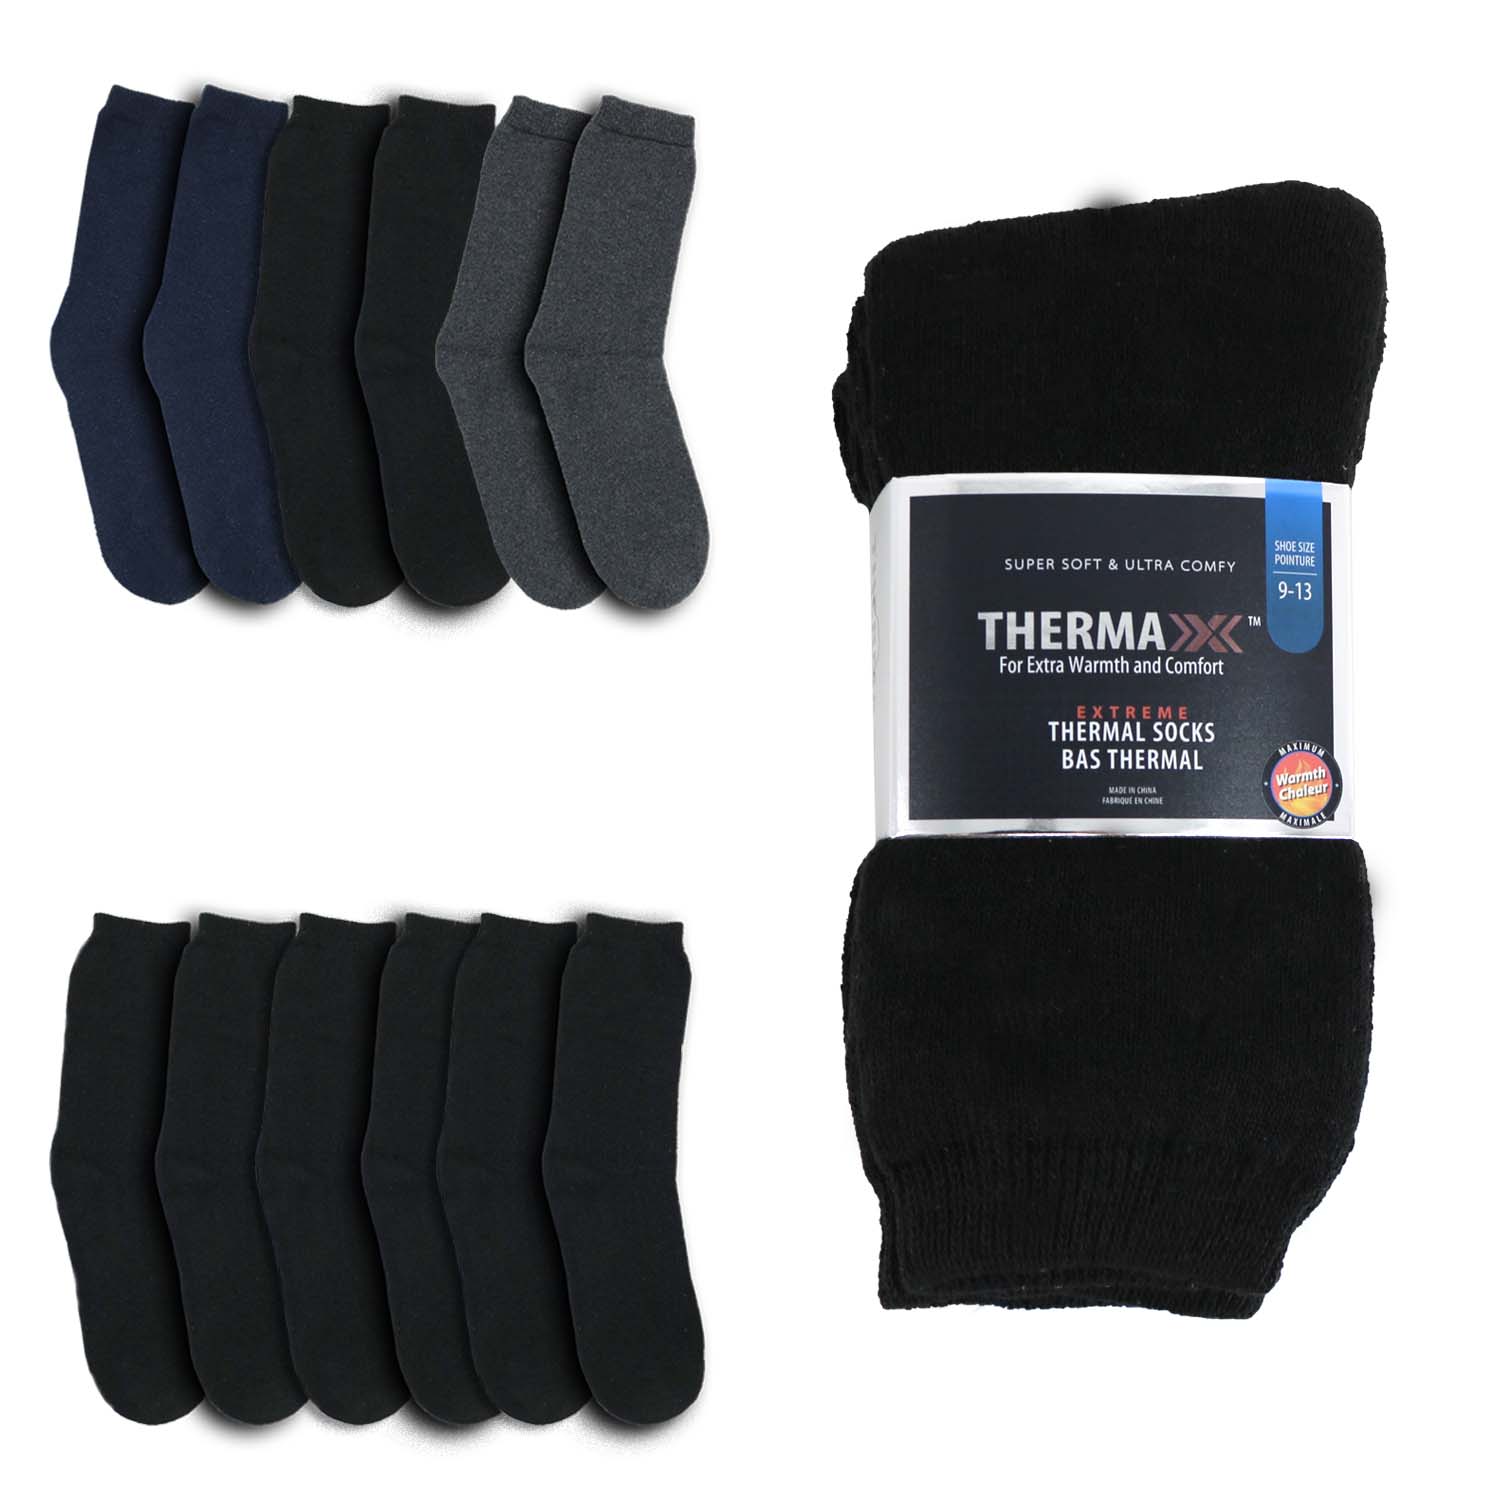 Unisex Crew Wholesale Thermal Sock, Size 9-13 in 3 Assorted Colors - Bulk Case of 96 Pairs